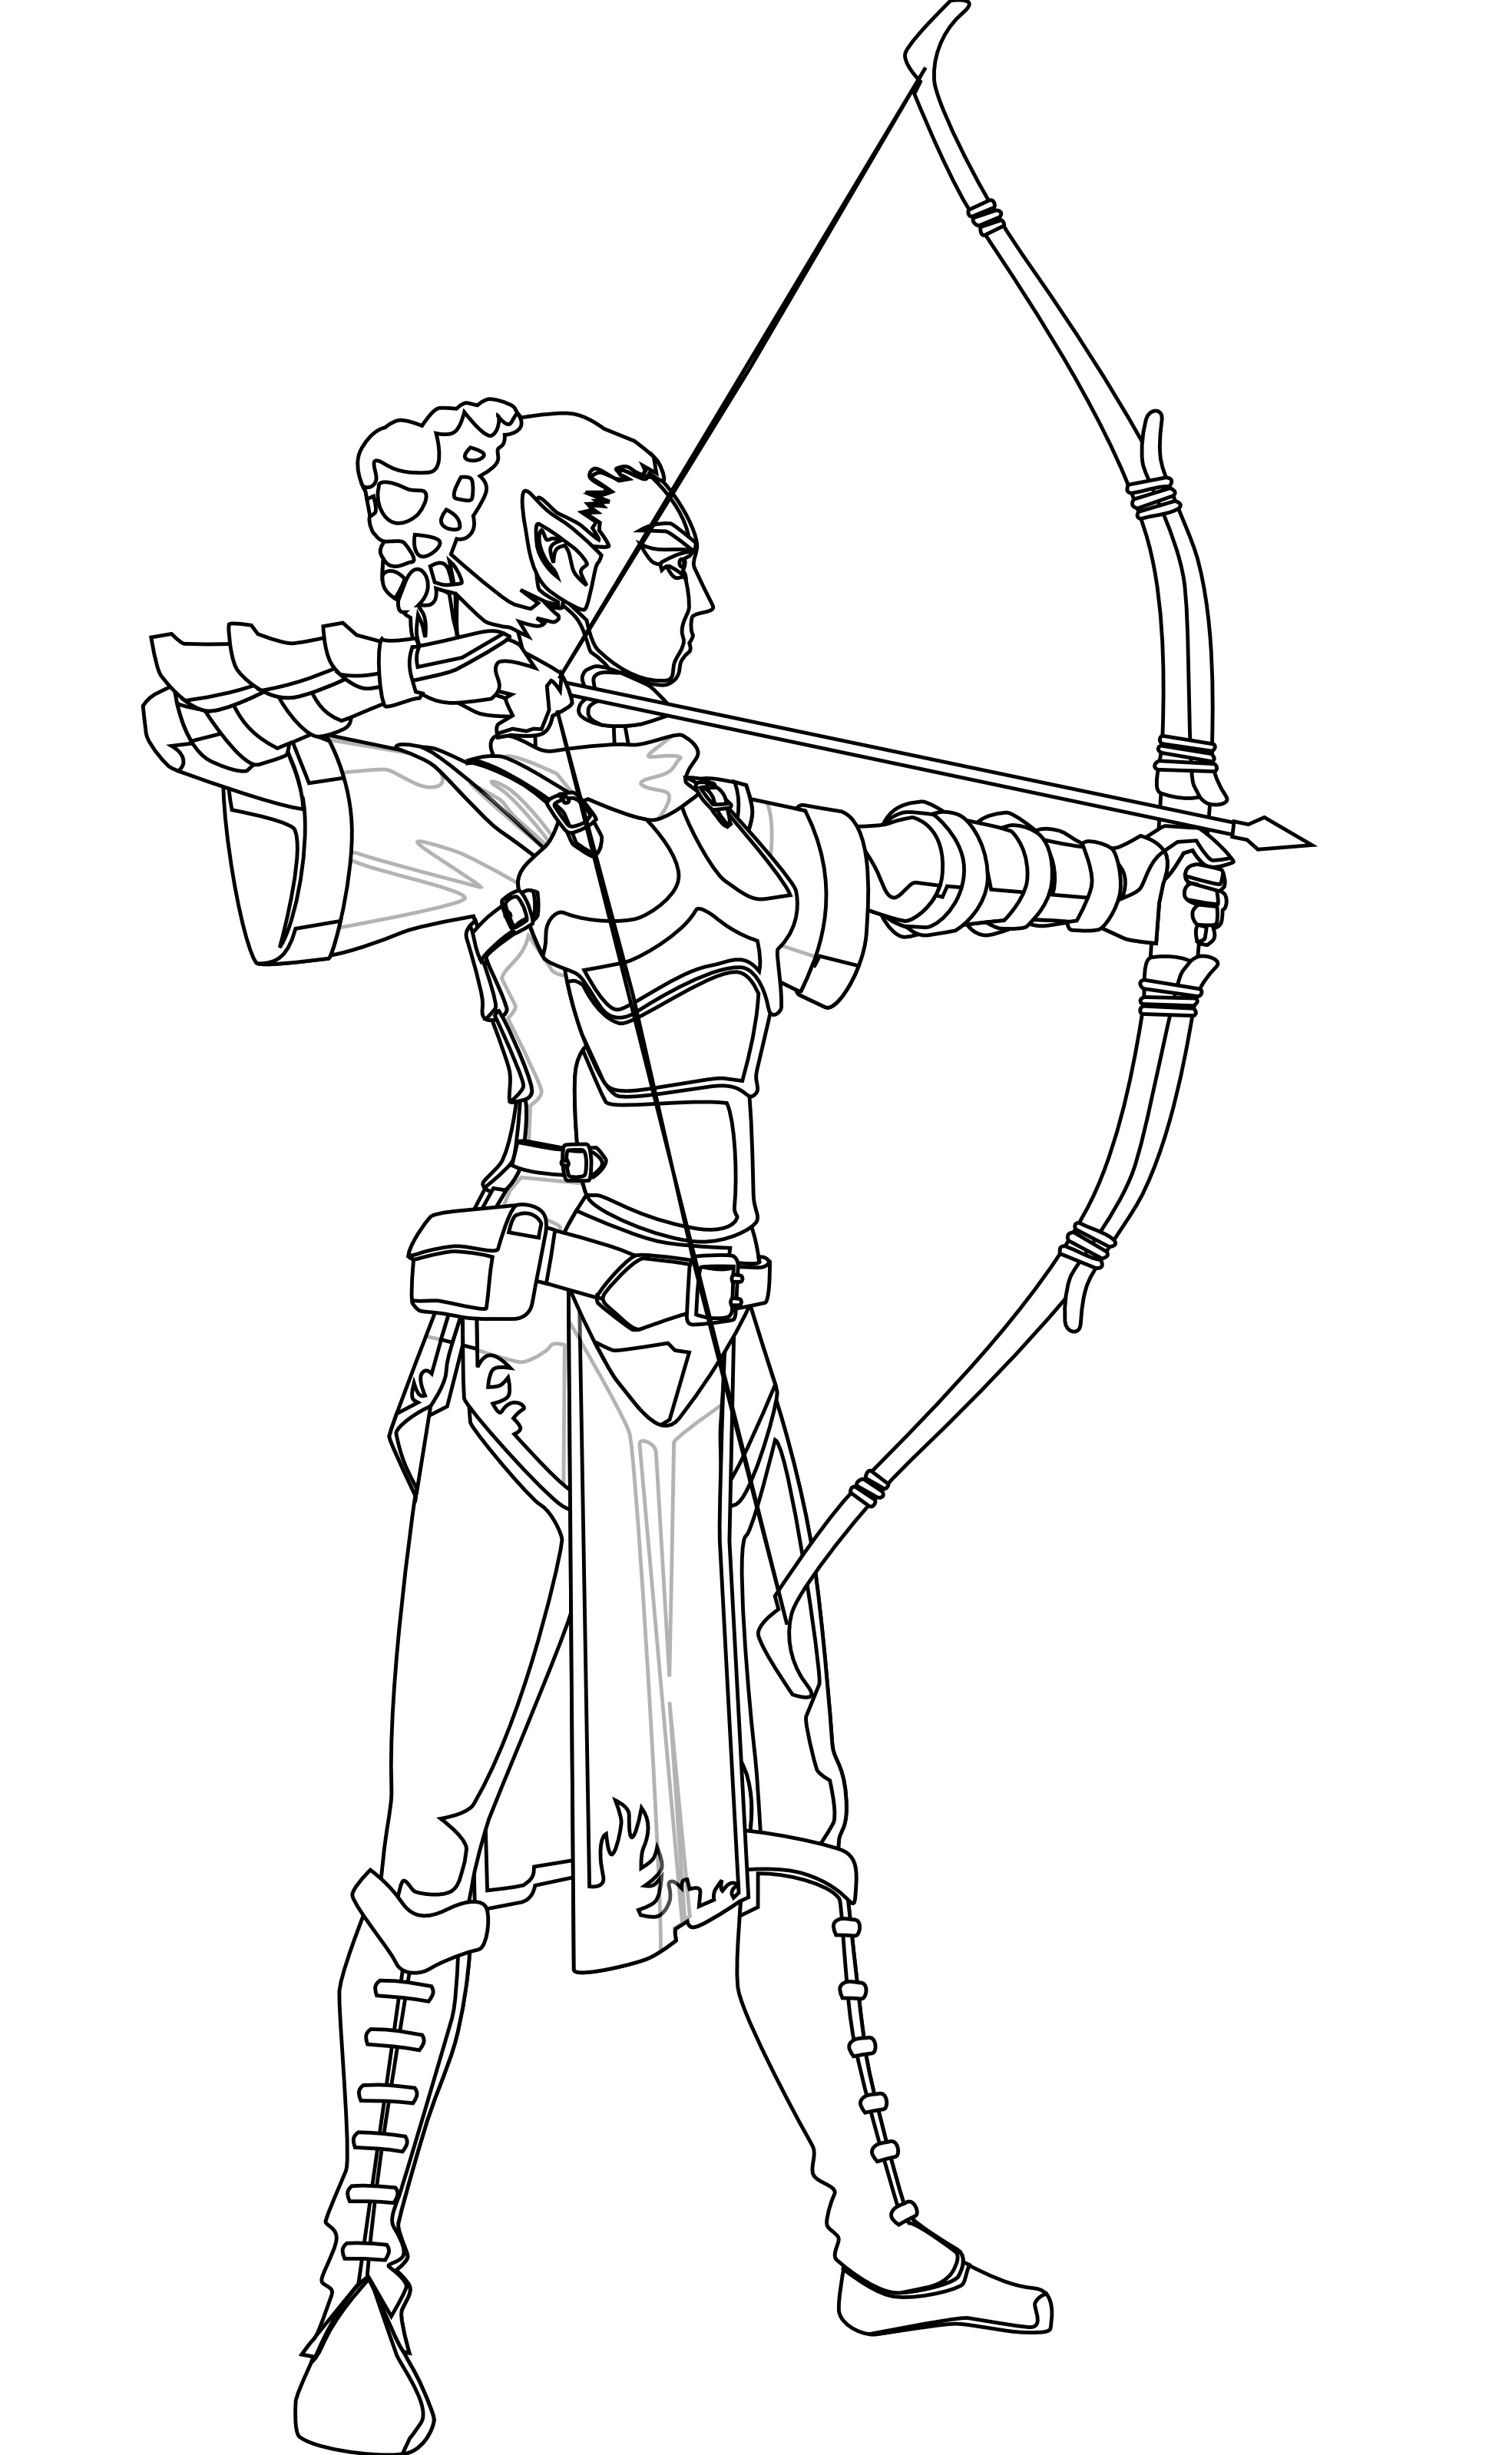 Black archer aiming bow and arrow | Archer pose, Woman archer, Gesture  drawing poses